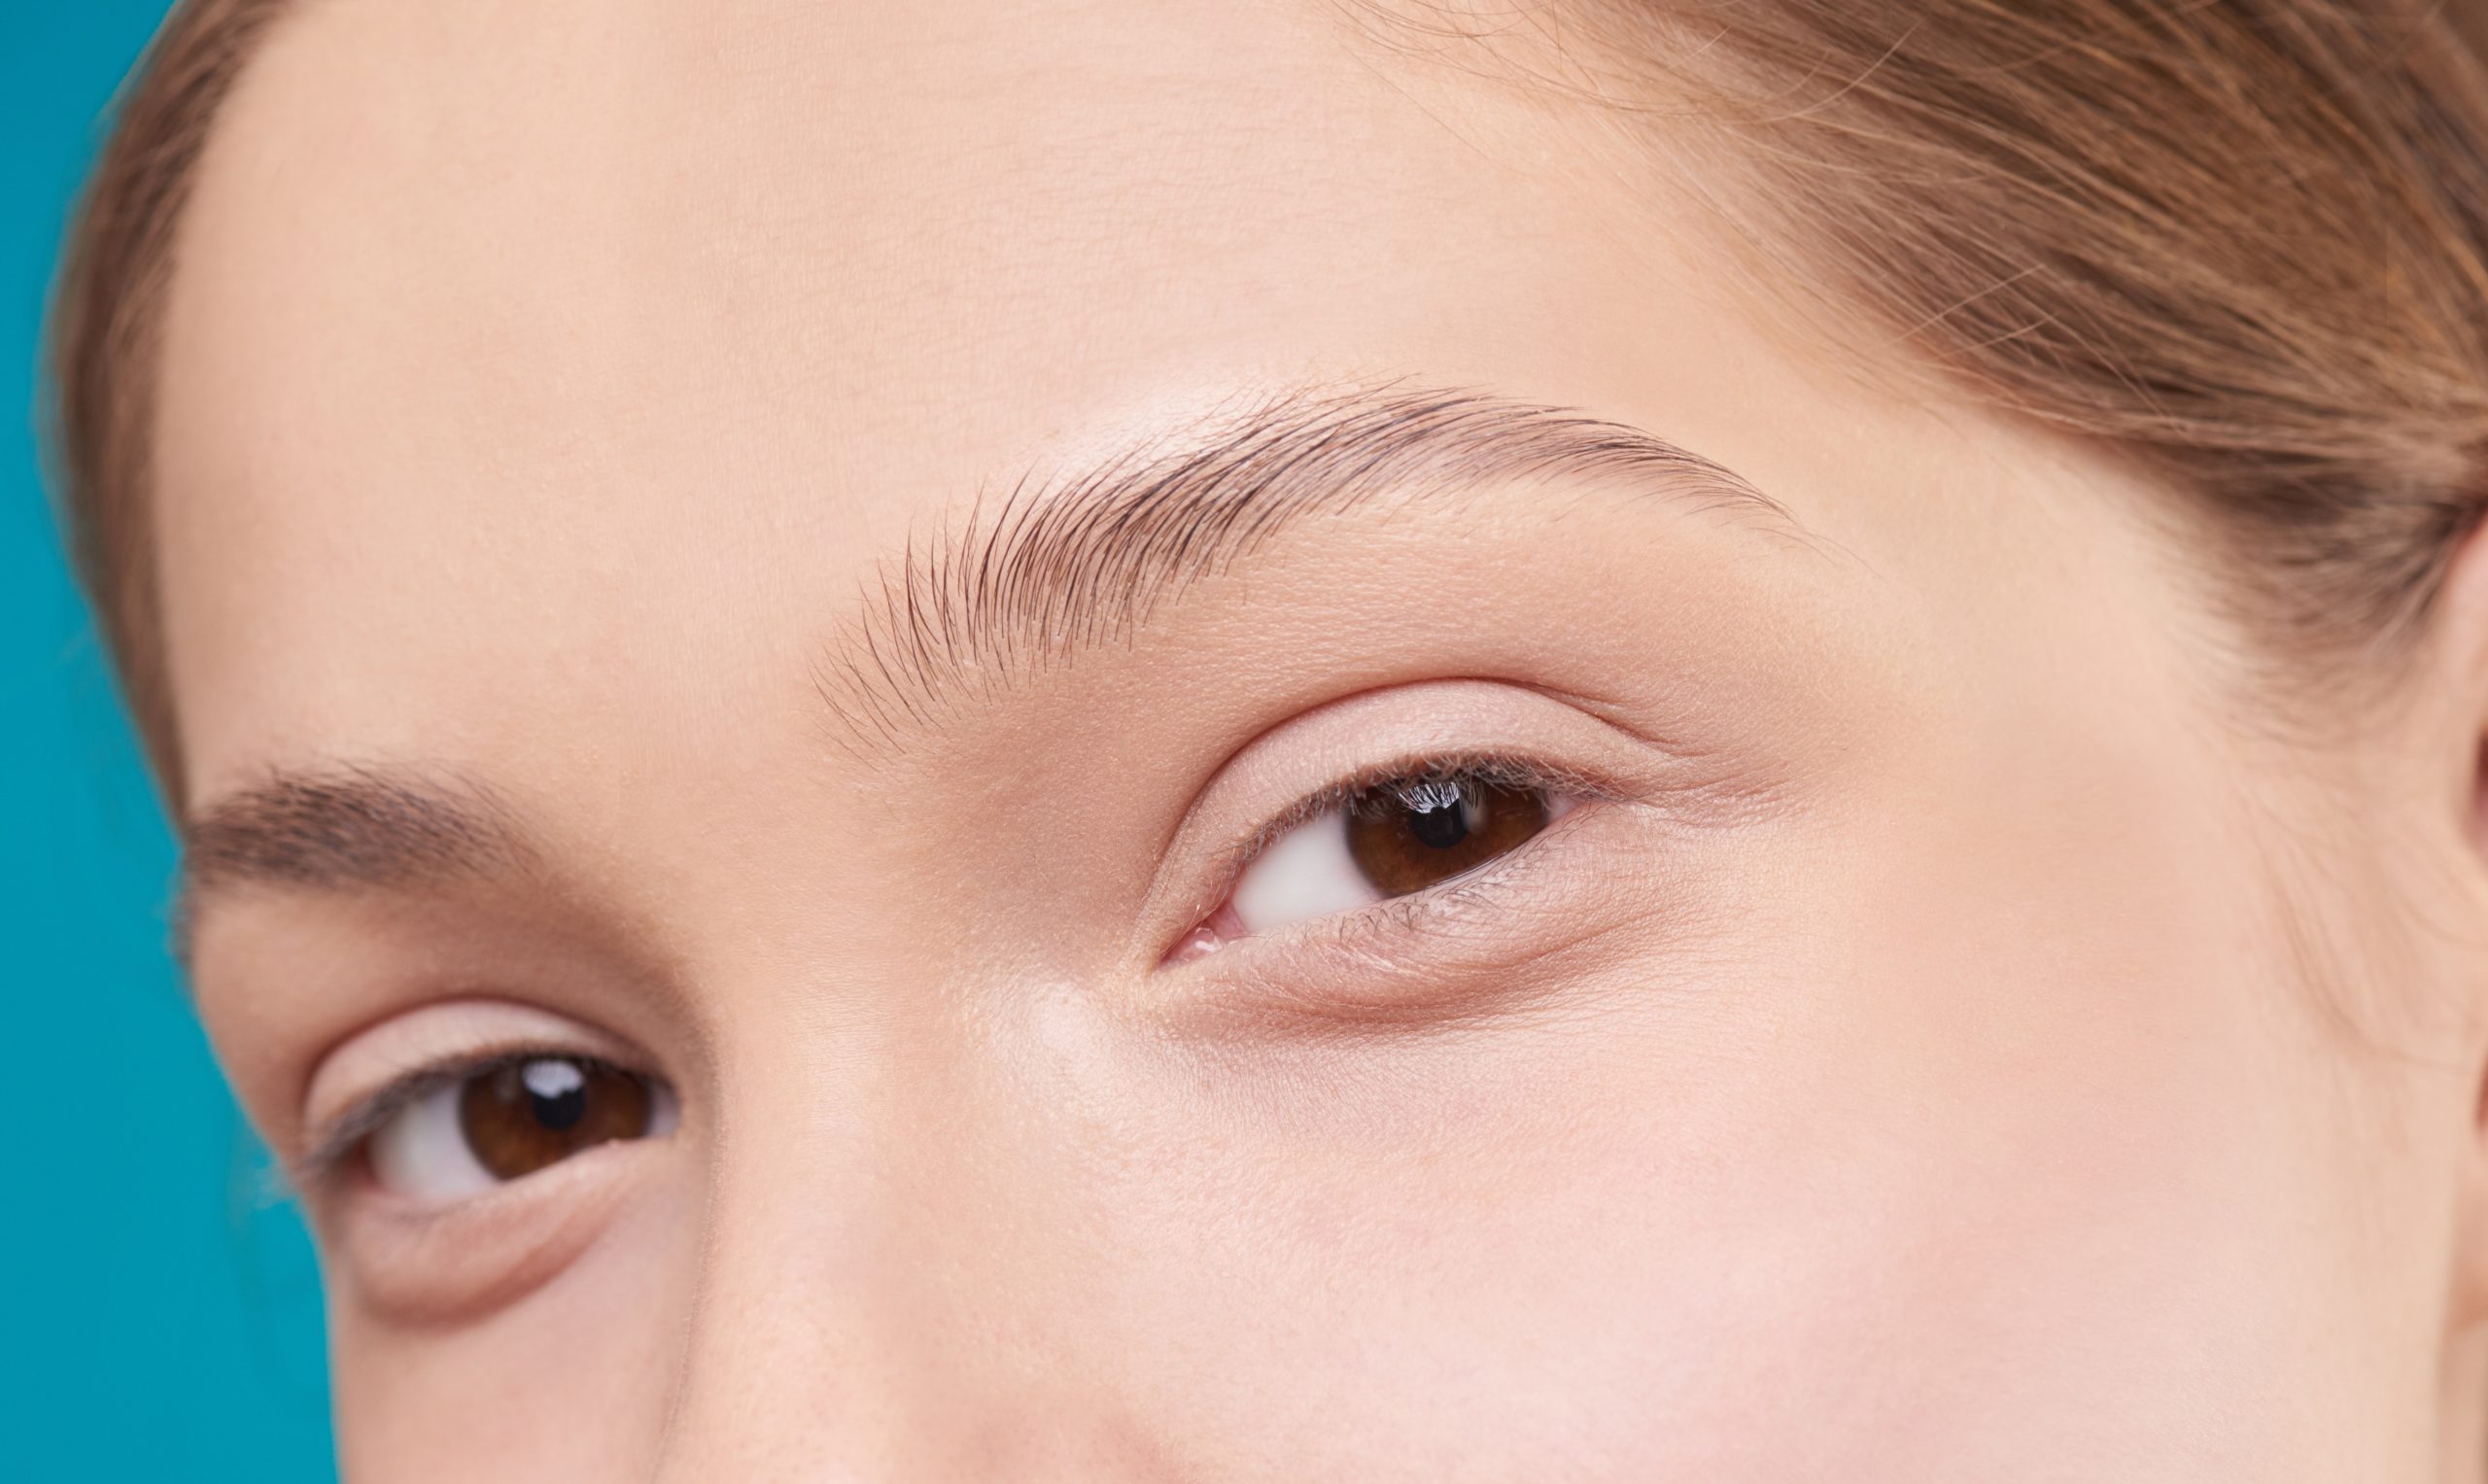 5 Glossier Brow Flick Dupes for Full Brows in 2021